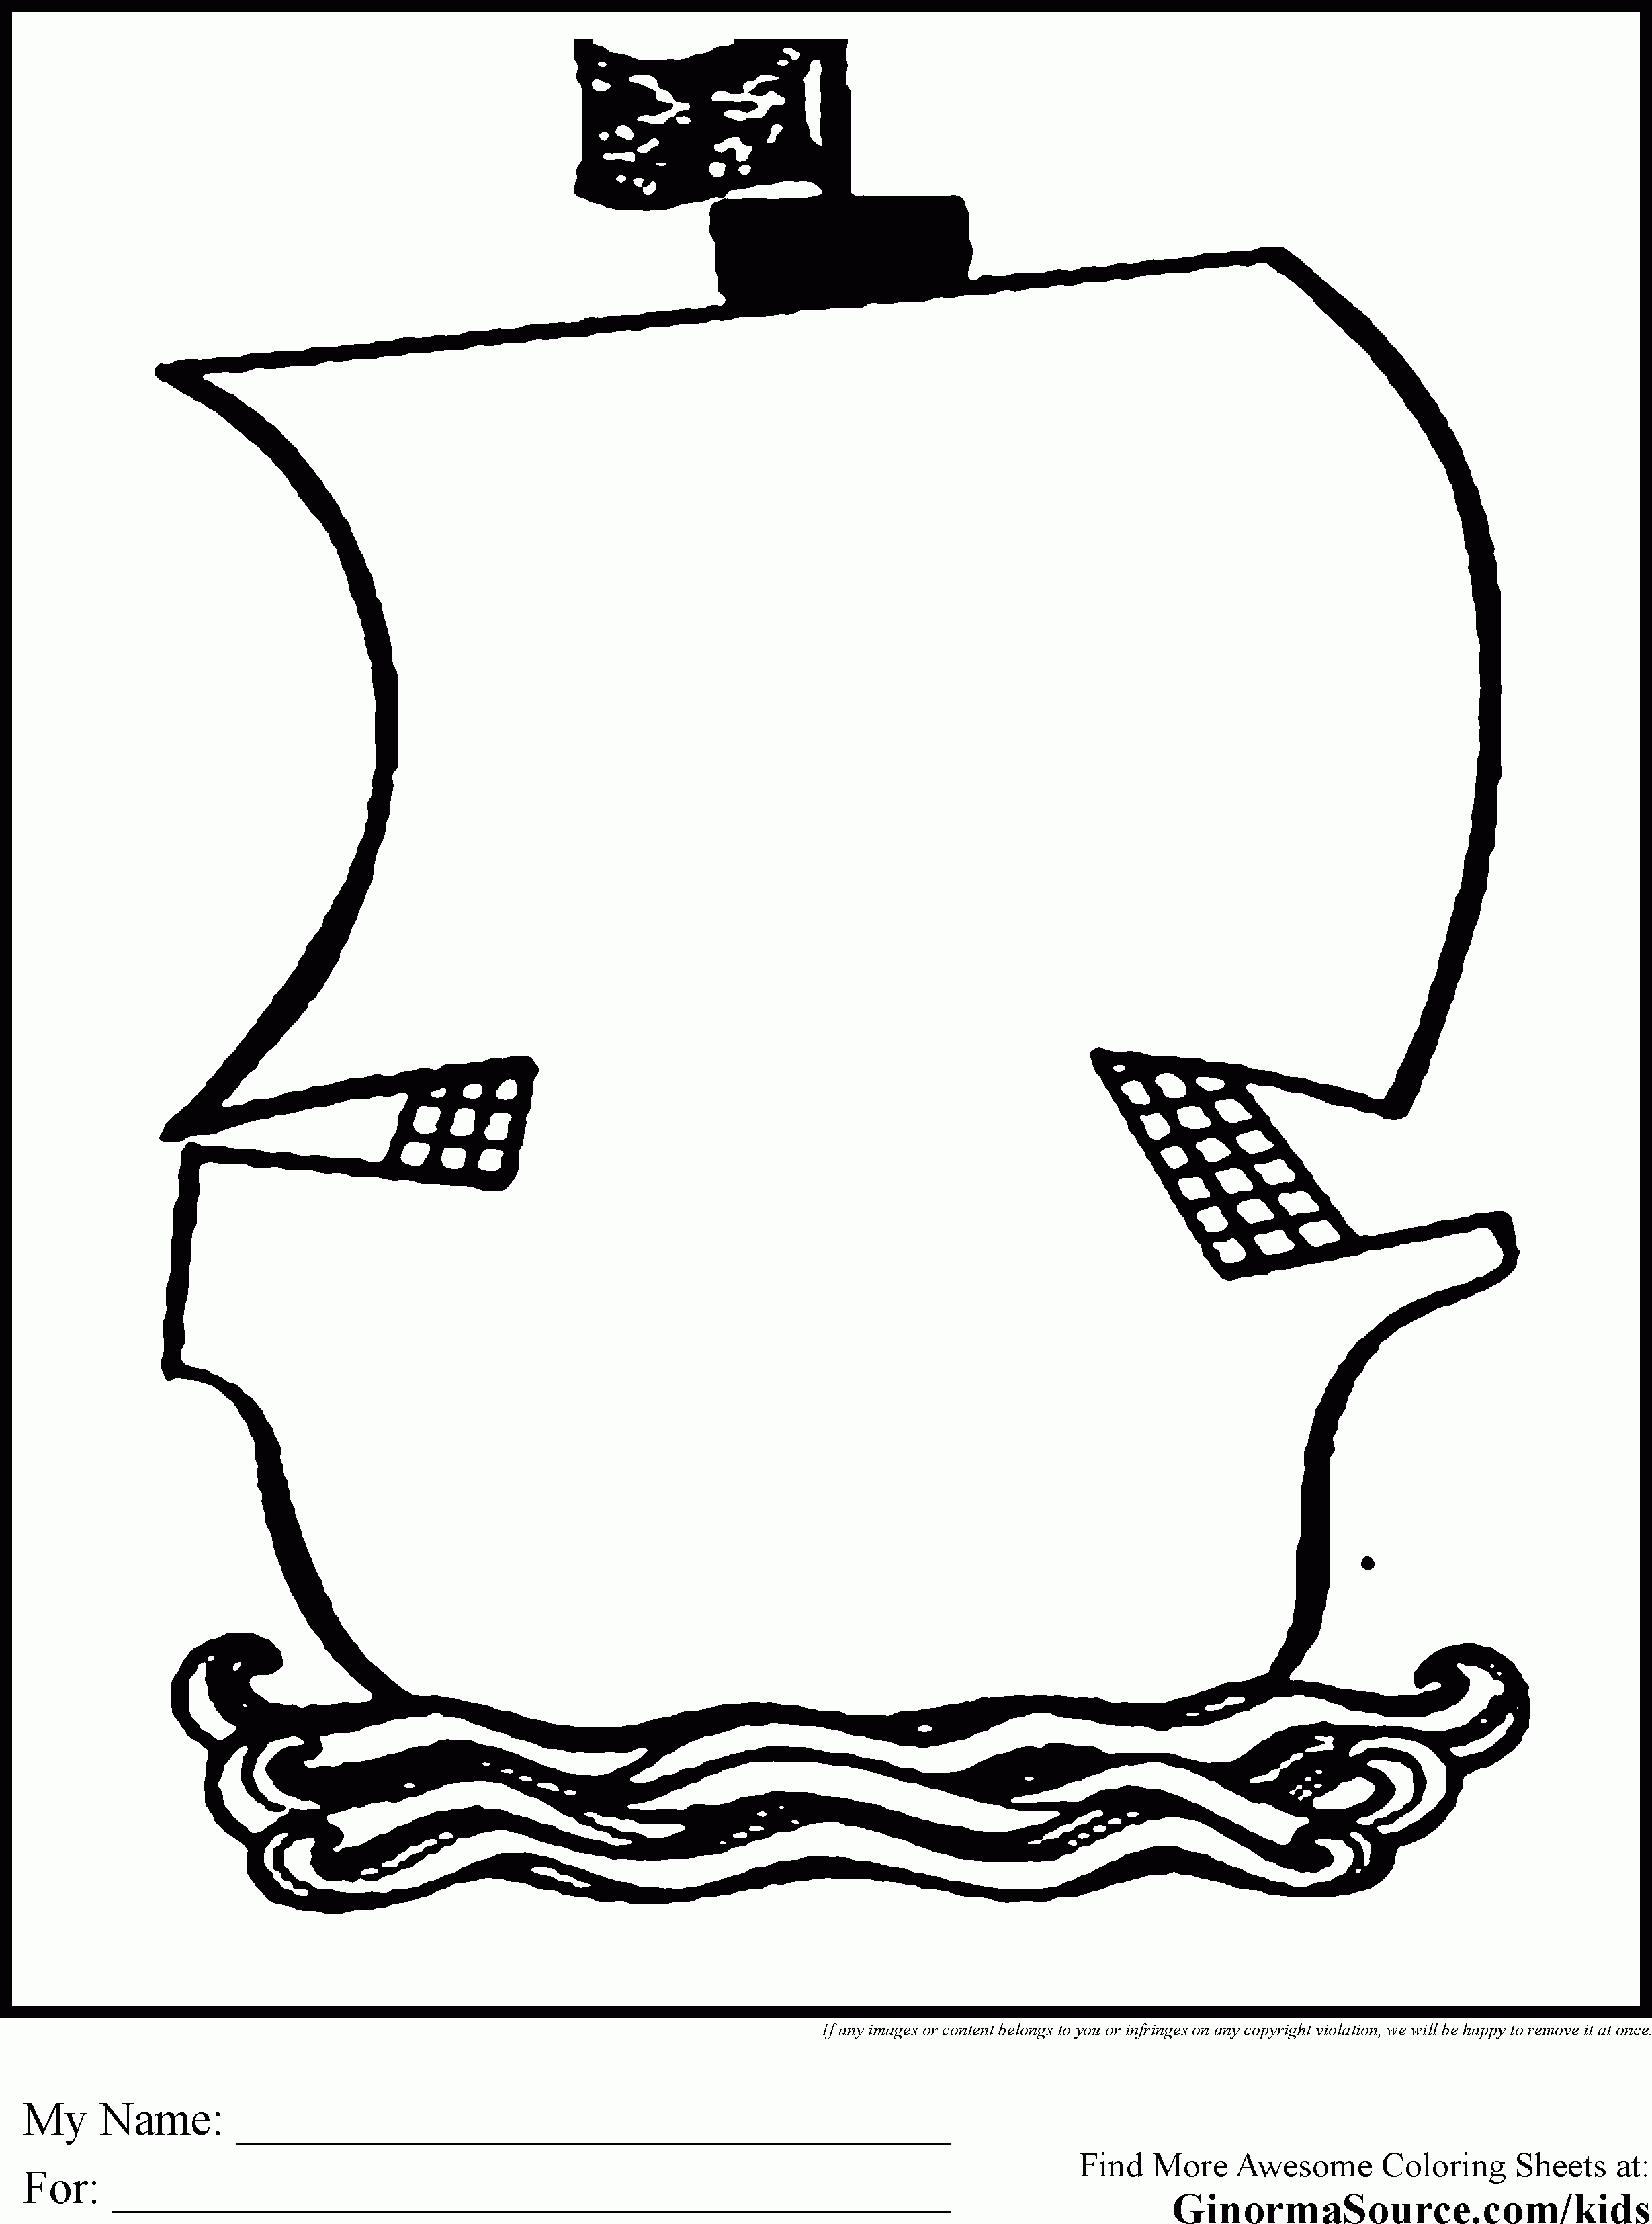 A Treasure Chest With Pirate Marks Coloring Page Kids Play Color